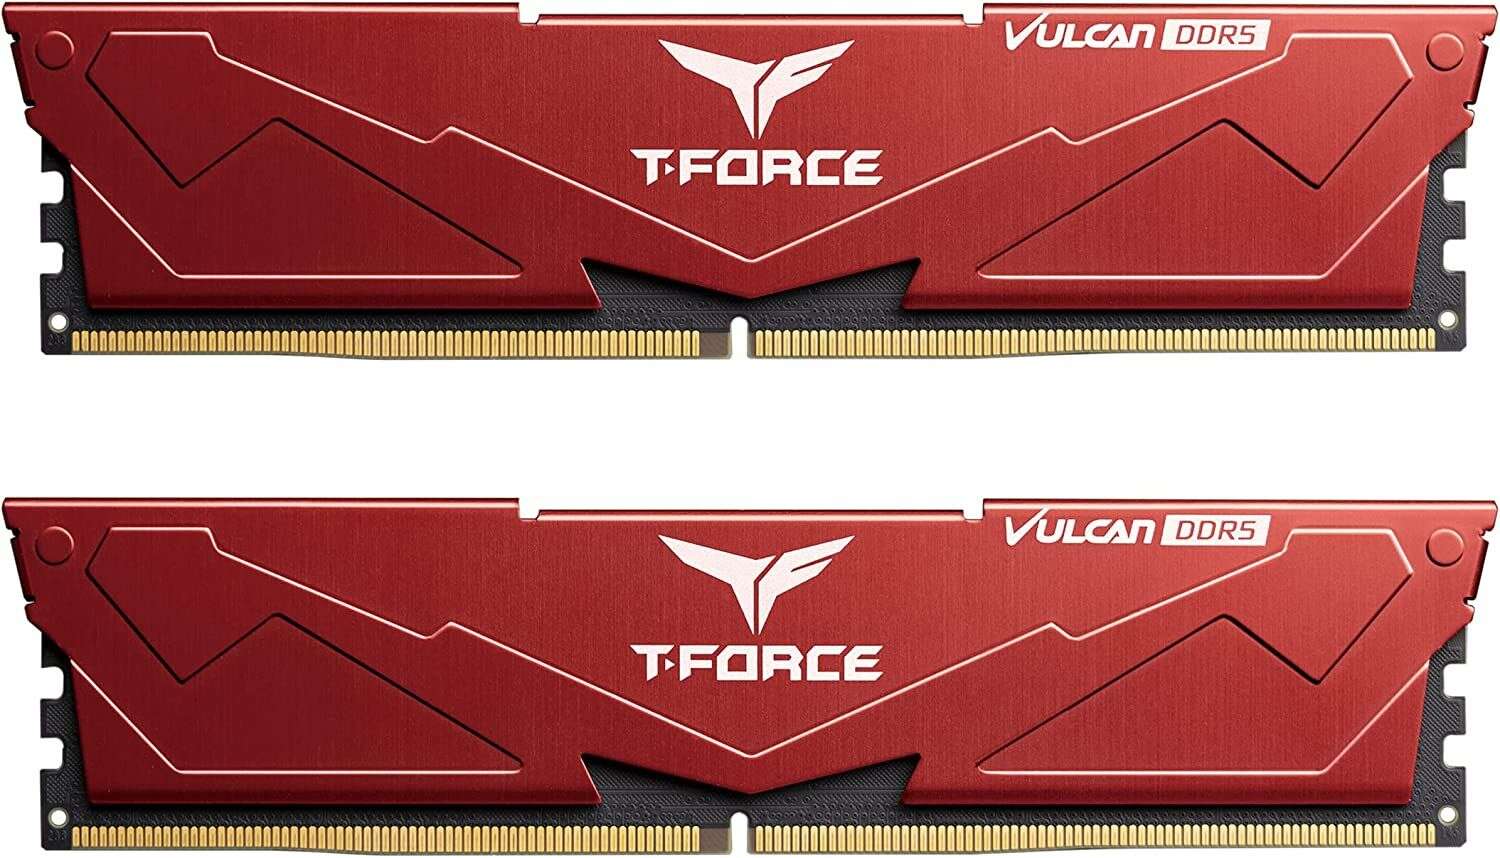 Teamgroup 32gb / 5600 t-force vulcan red ddr5 ram kit (2x16gb)